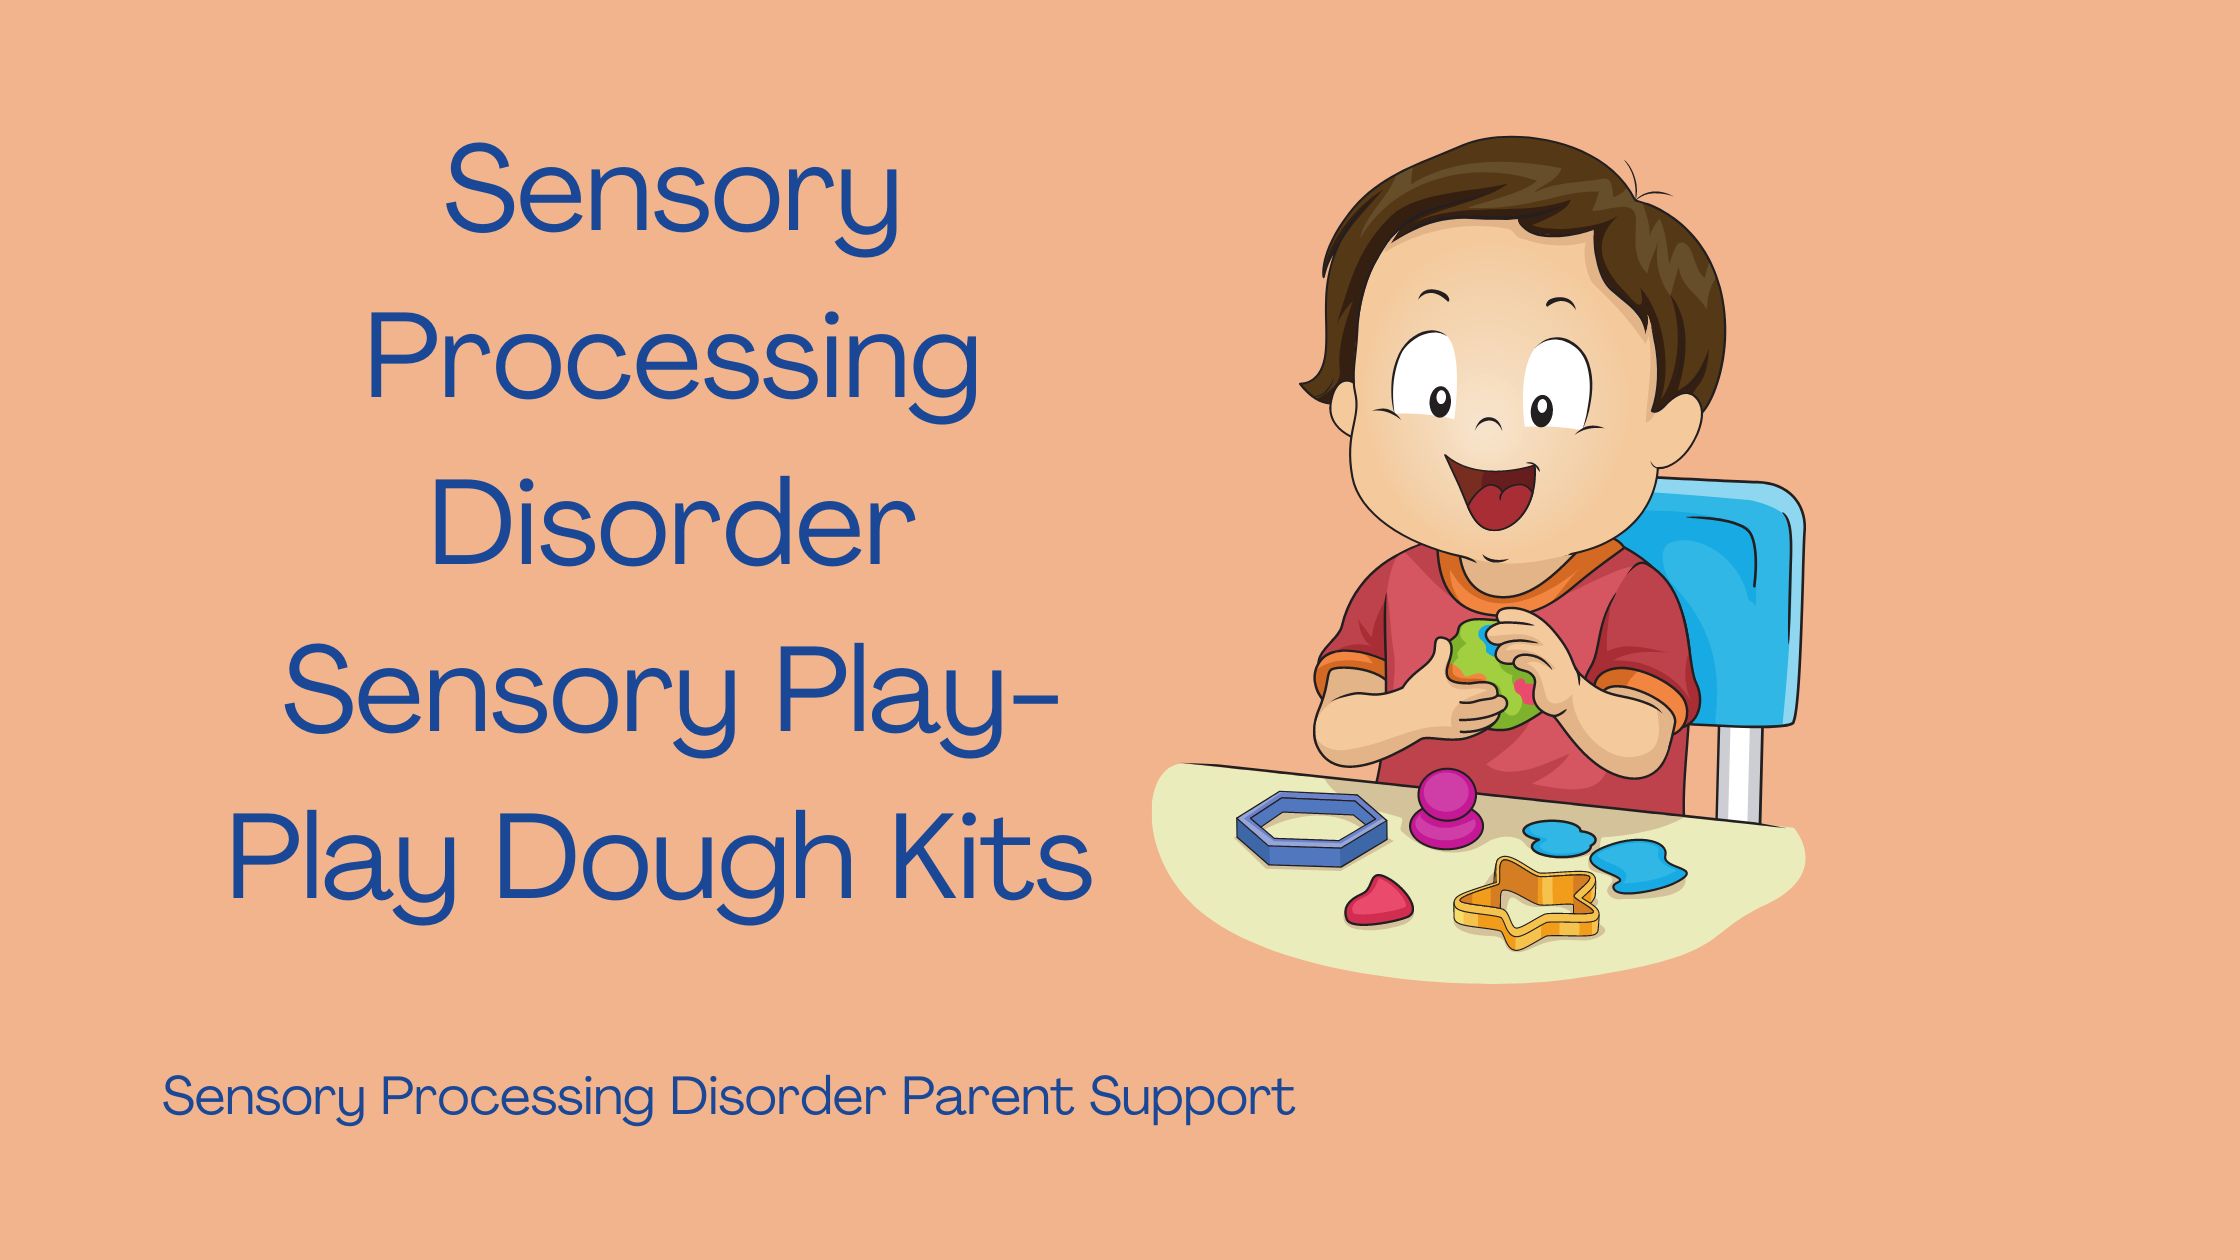 toddler with sensory processing disorder playing with sensory play dough sensory processing disorder sensory play dough sensory play